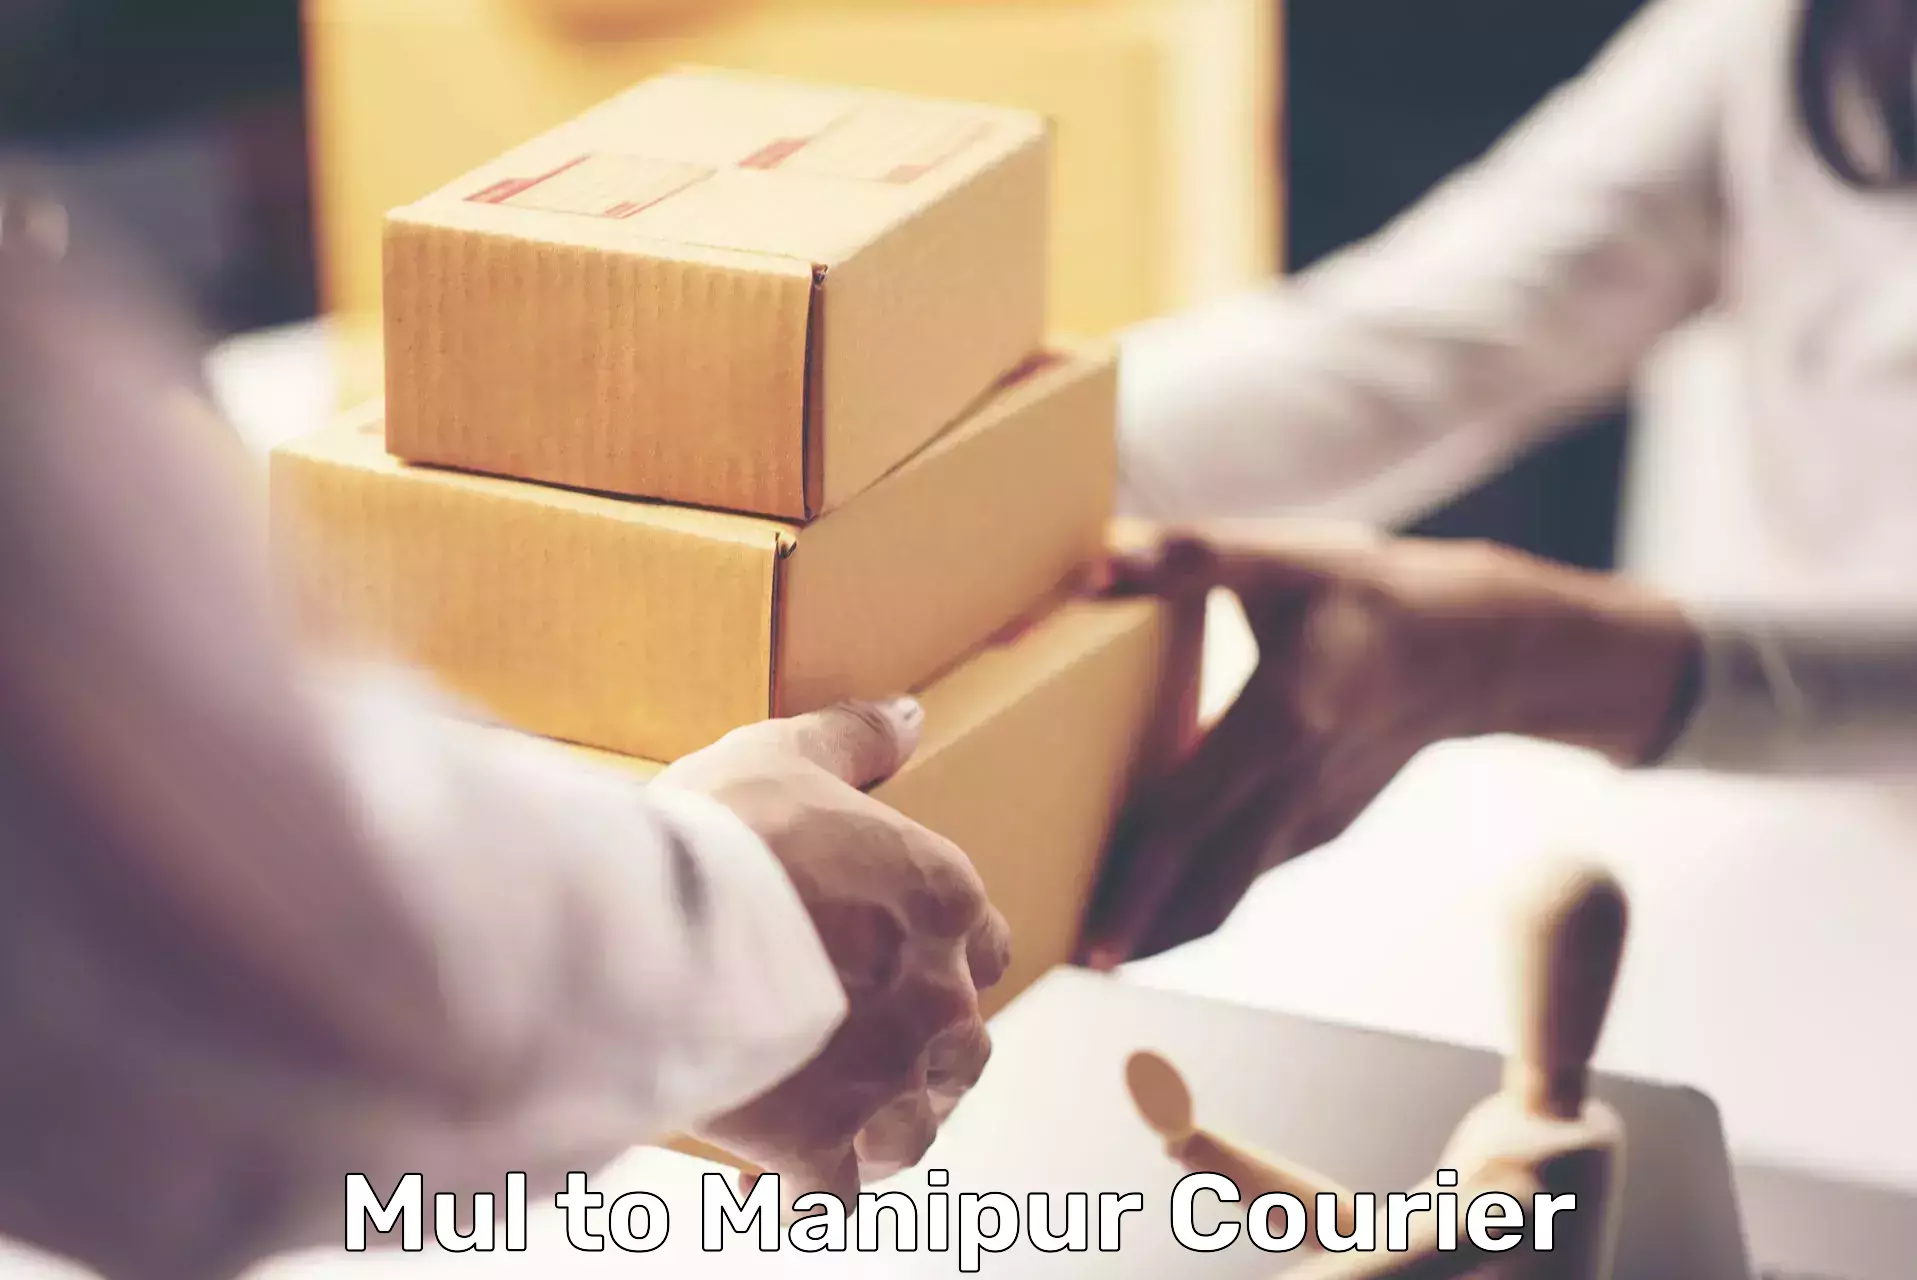 Customer-centric shipping Mul to Ukhrul